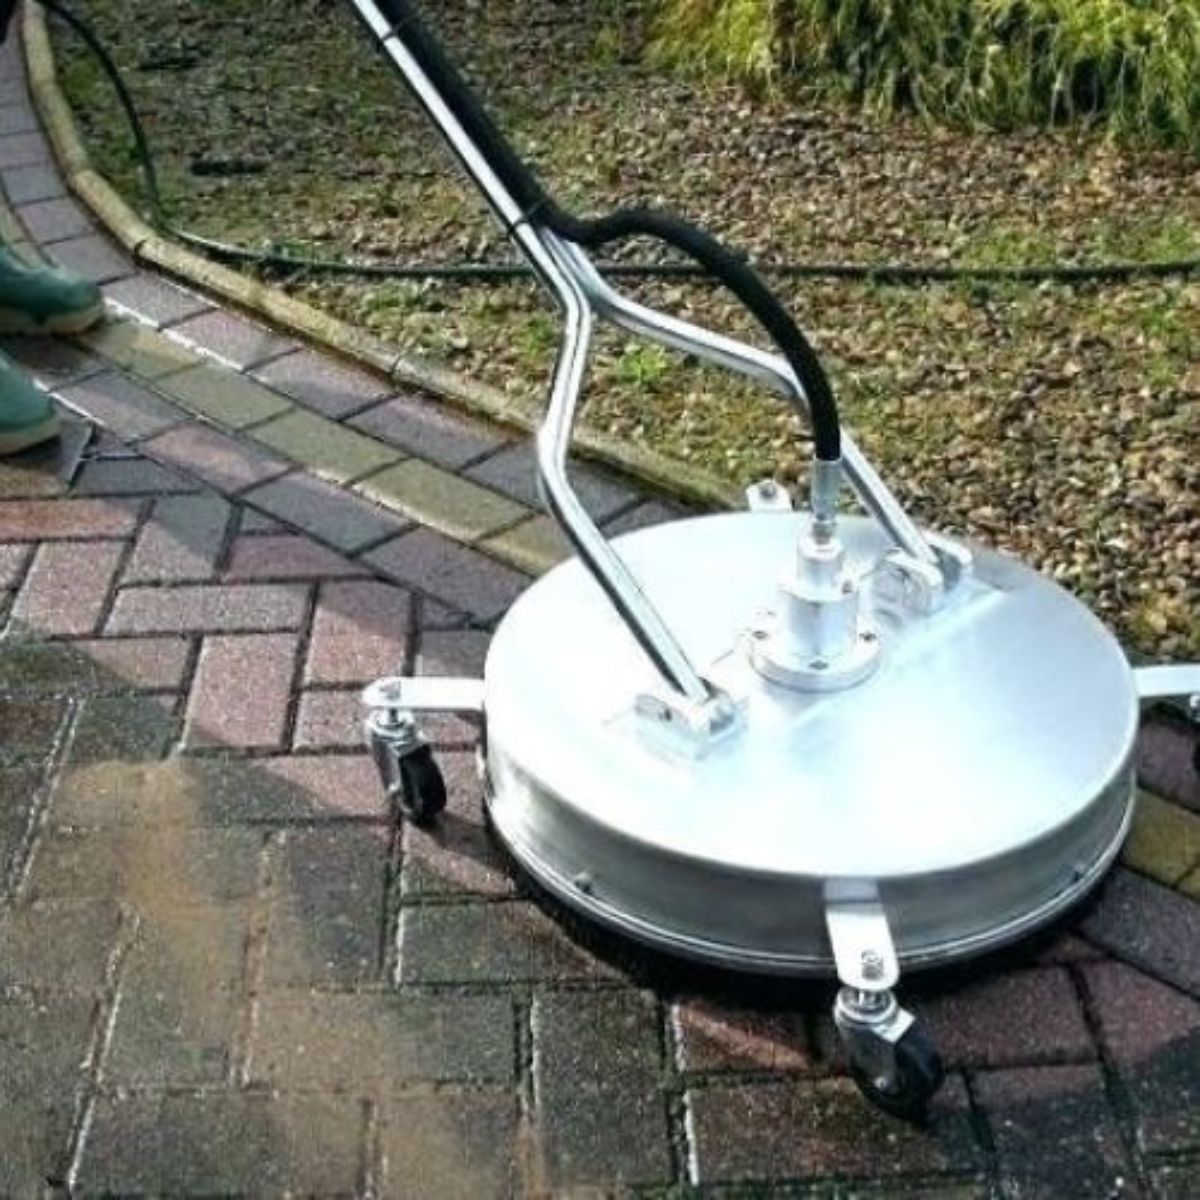 patio-washing-attachment-september2021-1-600x445-1 (1)